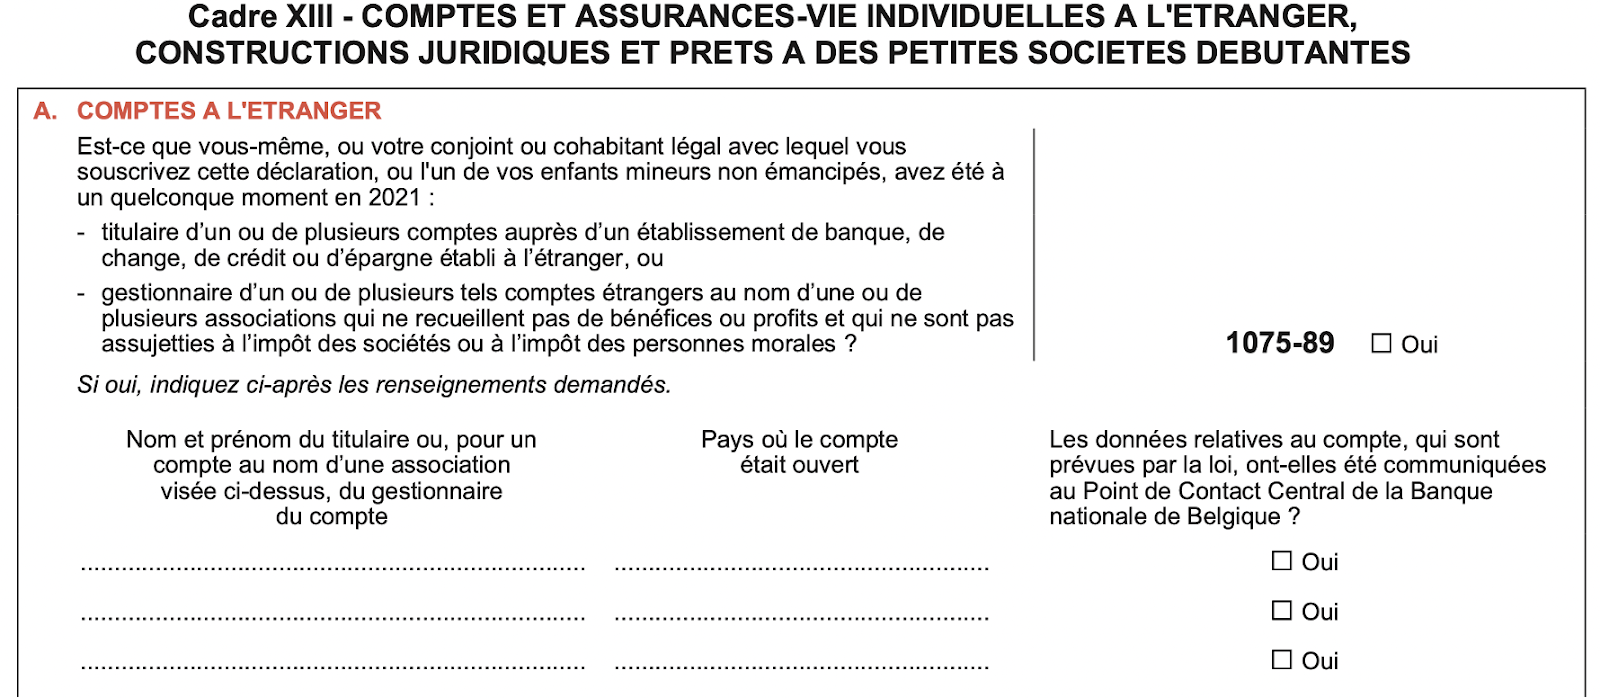 Personal Tax return - example of the French version of Box XIII